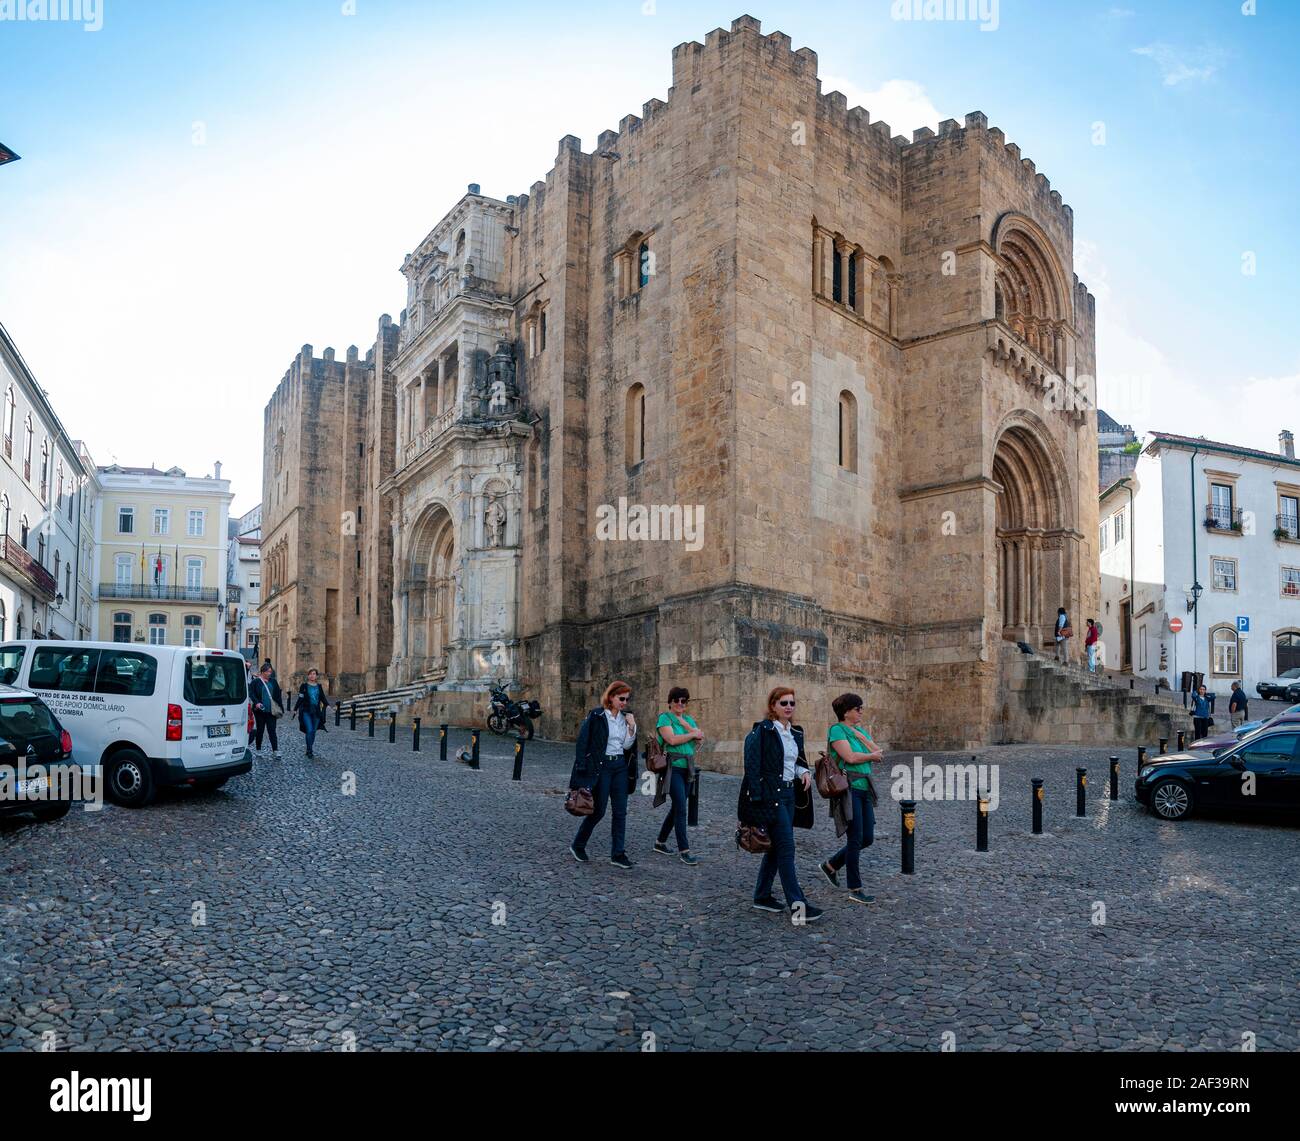 The entrance to the old Romanesque Cathedral (13th century), Coimbra, Portugal Stock Photo